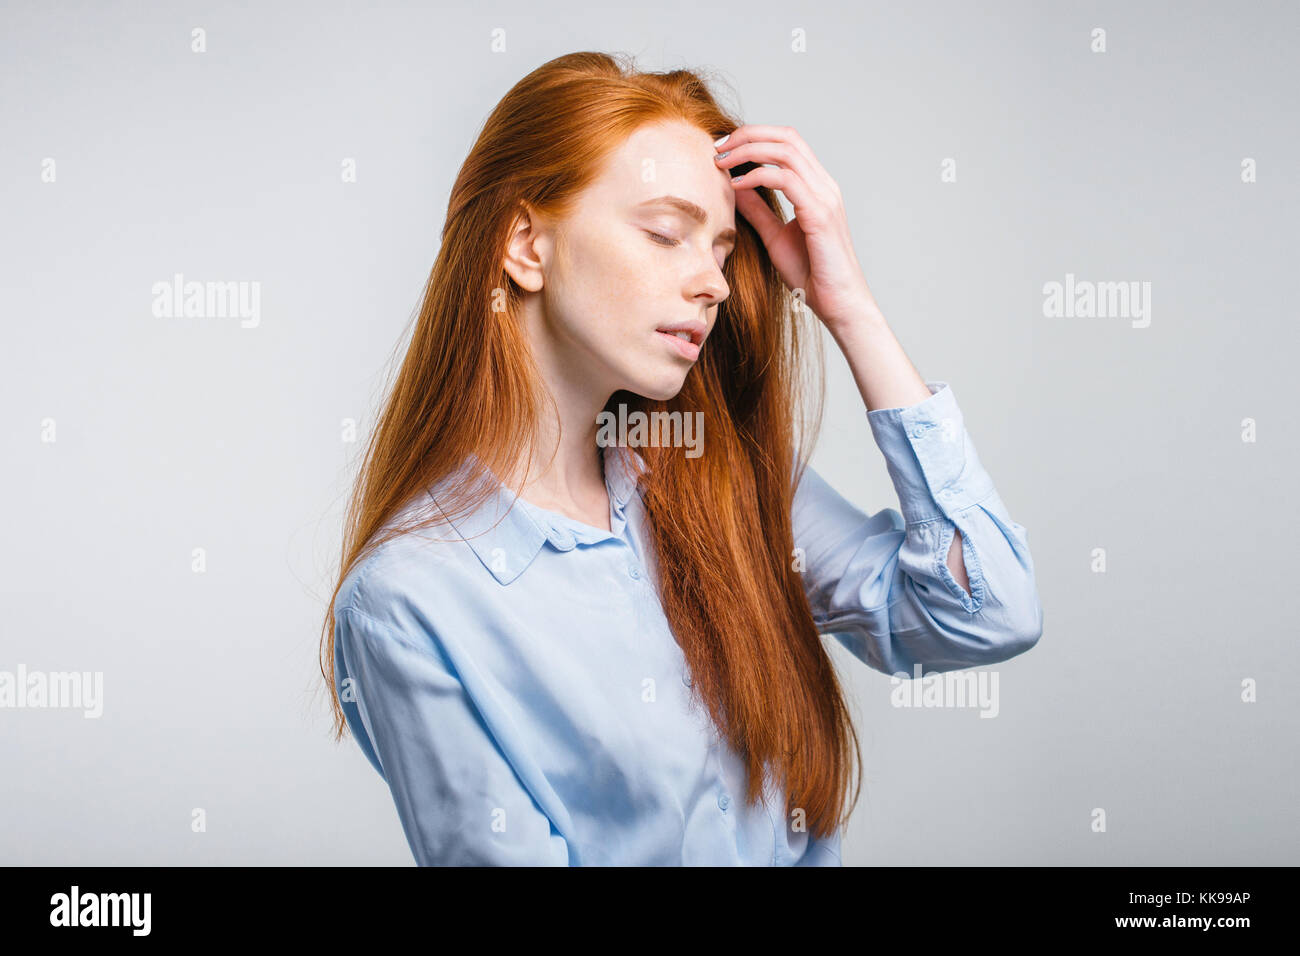 girl with freckles smiling with closed eyes touching her red hair Stock Photo